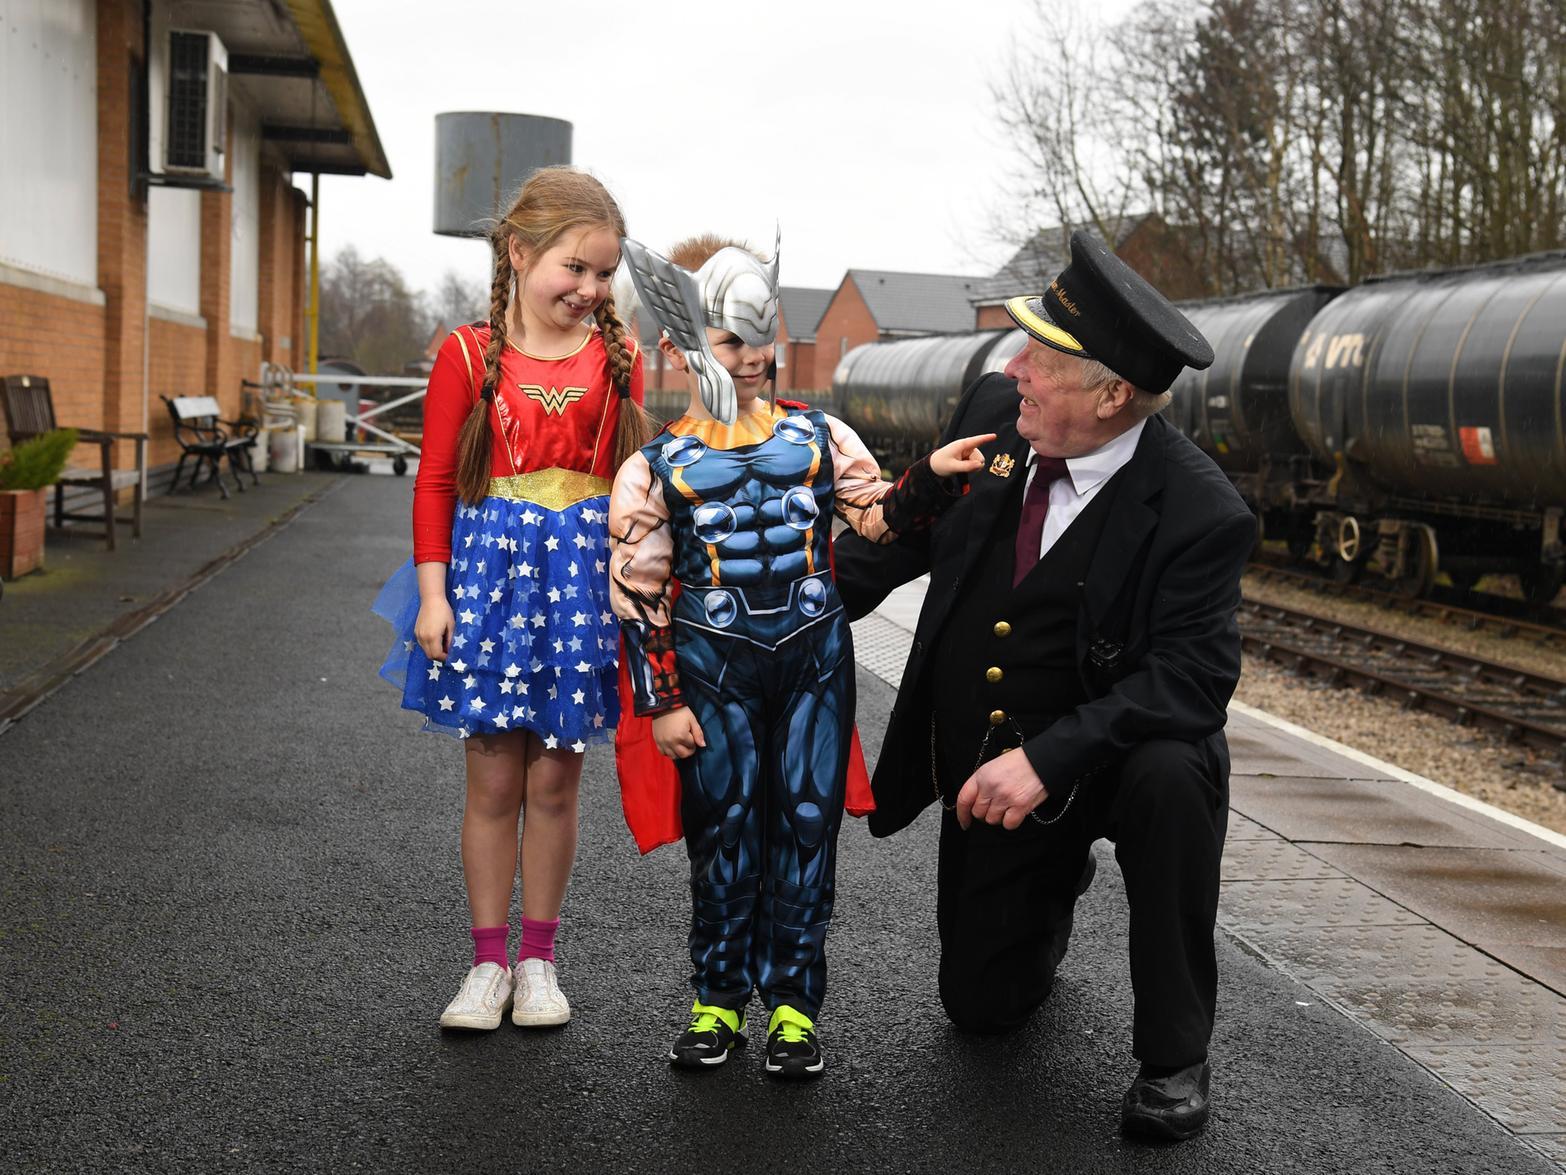 Superhero day at Ribble Steam Railway and Museum.
Rosie and James Yarrow with Station Master Dave Crosby.